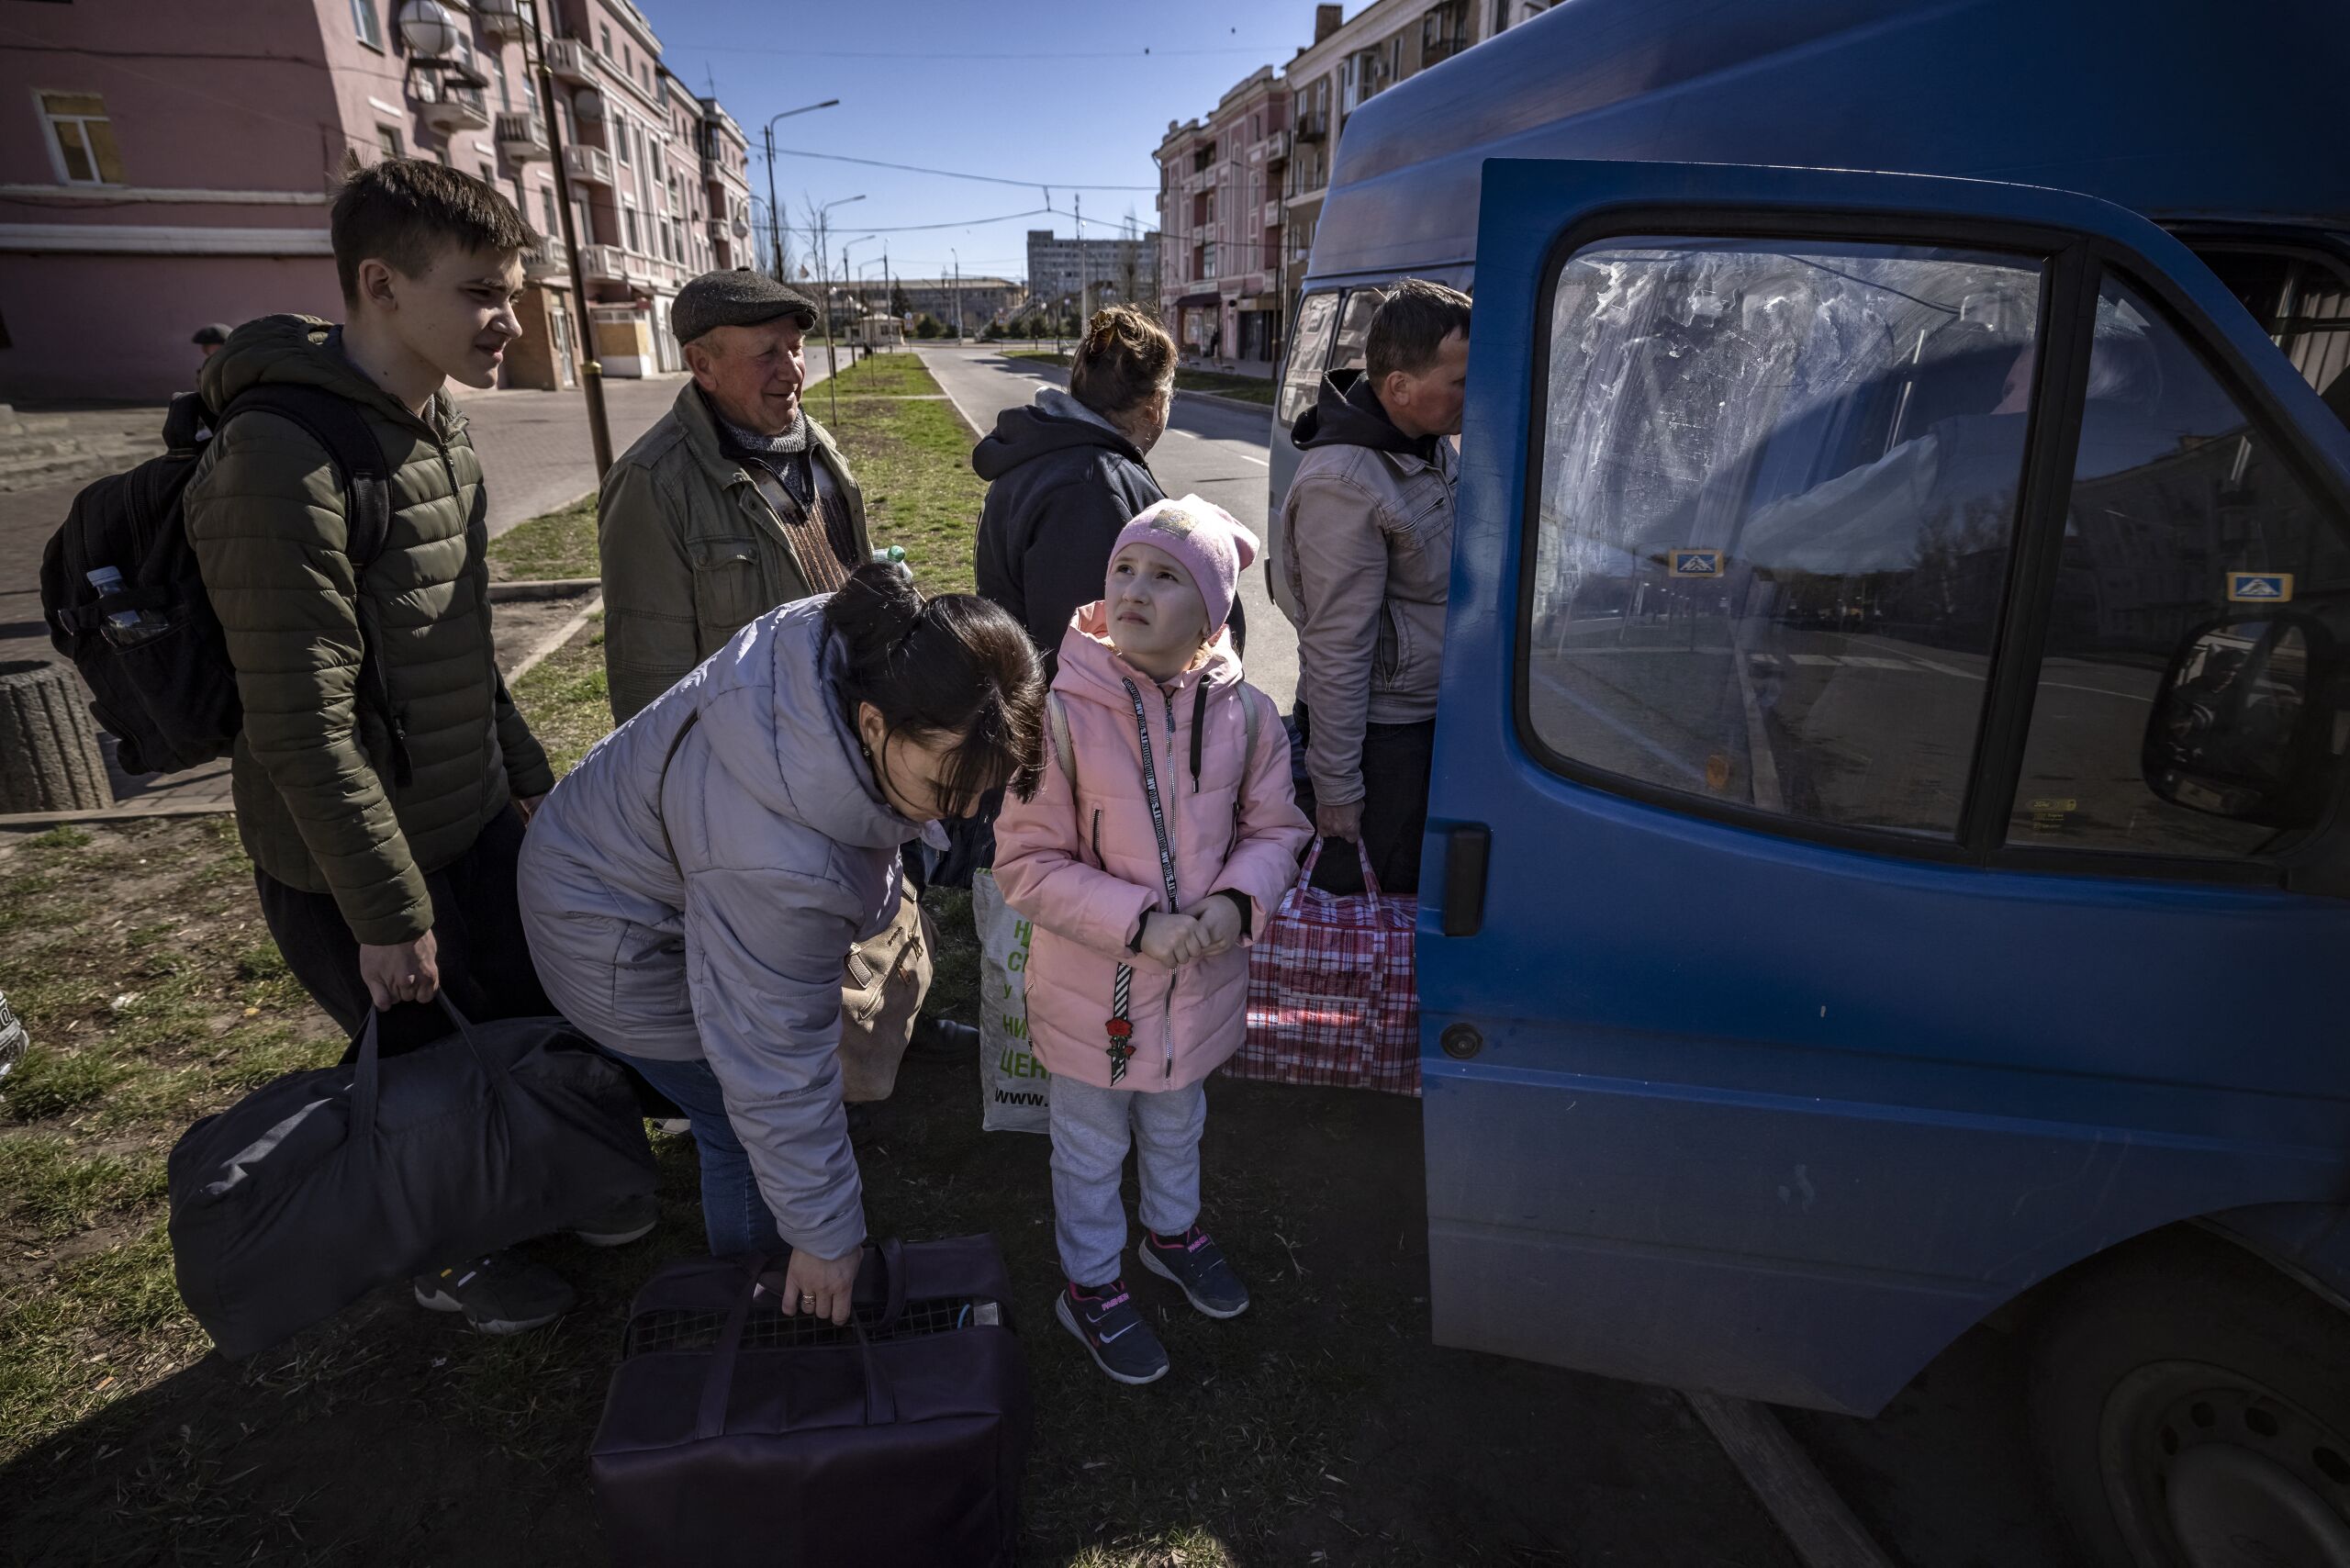 People wait for a bus as a children looks at the sky, a day after a rocket attack at a train station, in Kramatorsk, on April 9, 2022. At least 52 people were killed, including five children, following a rocket attack on April 8 on a train station in the eastern Ukrainian city of Kramatorsk that is being used for civilian evacuations, according to Donetsk region governor. FADEL SENNA / AFP